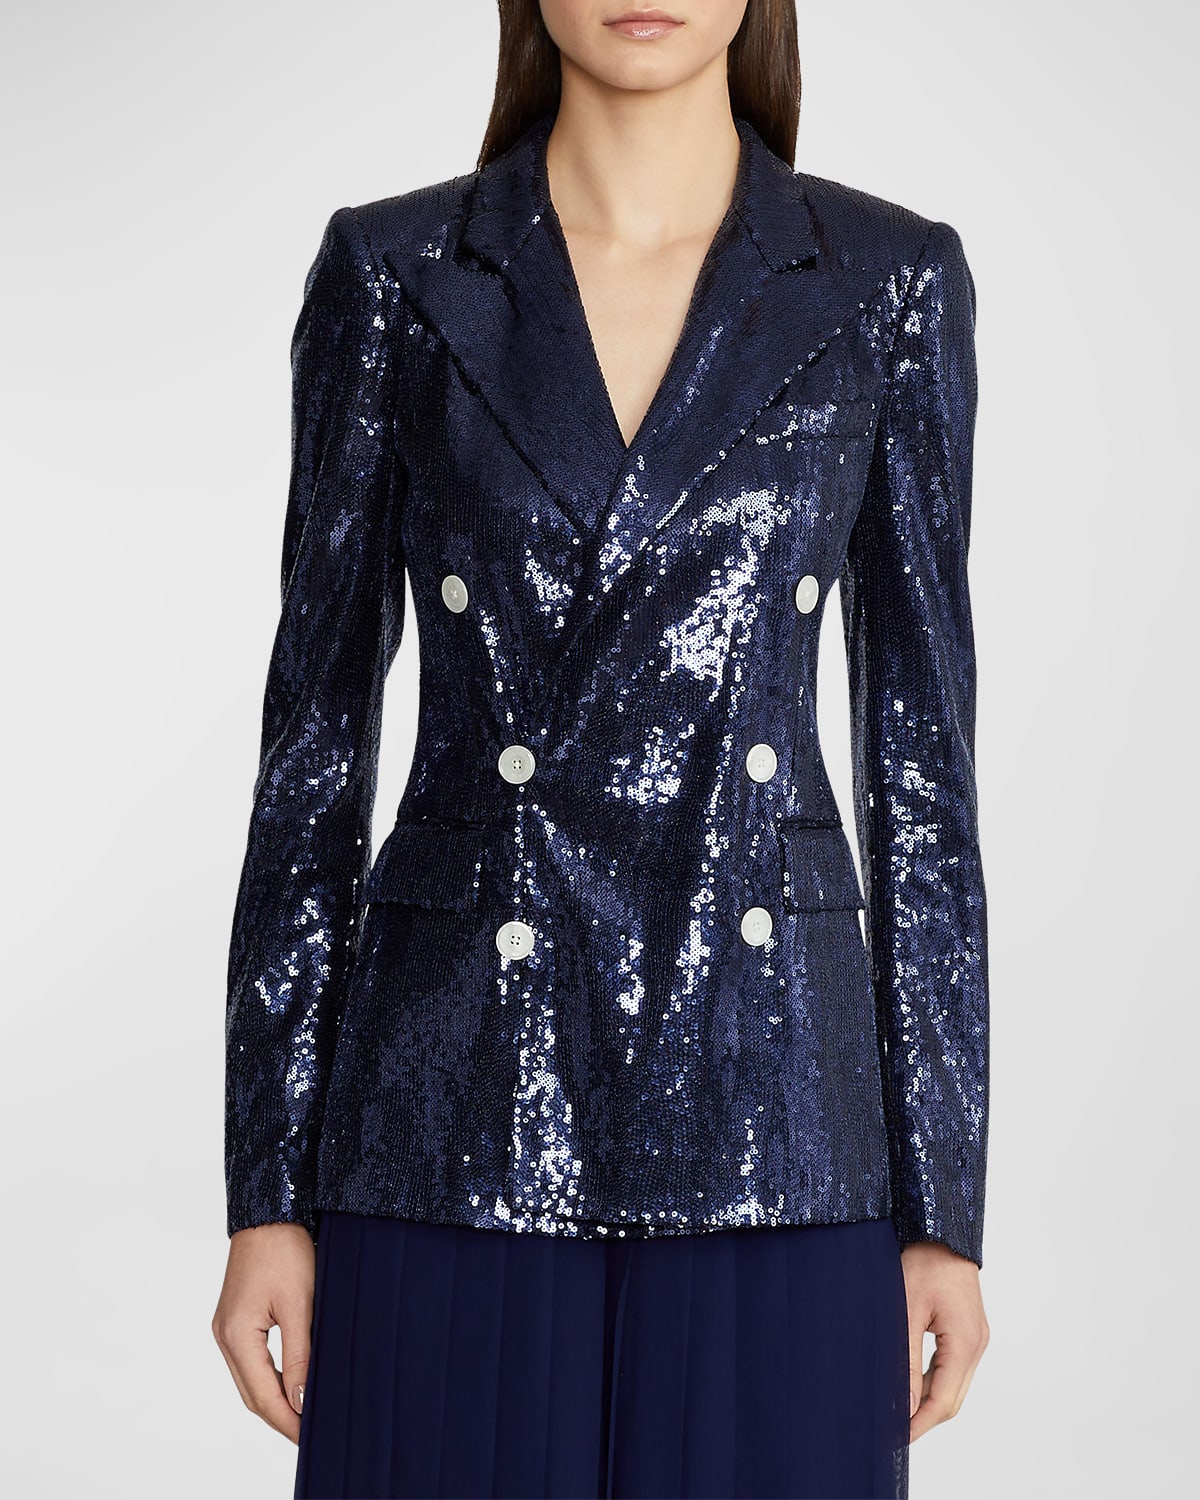 Camden Embellished Blazer Jacket with Pearl Buttons